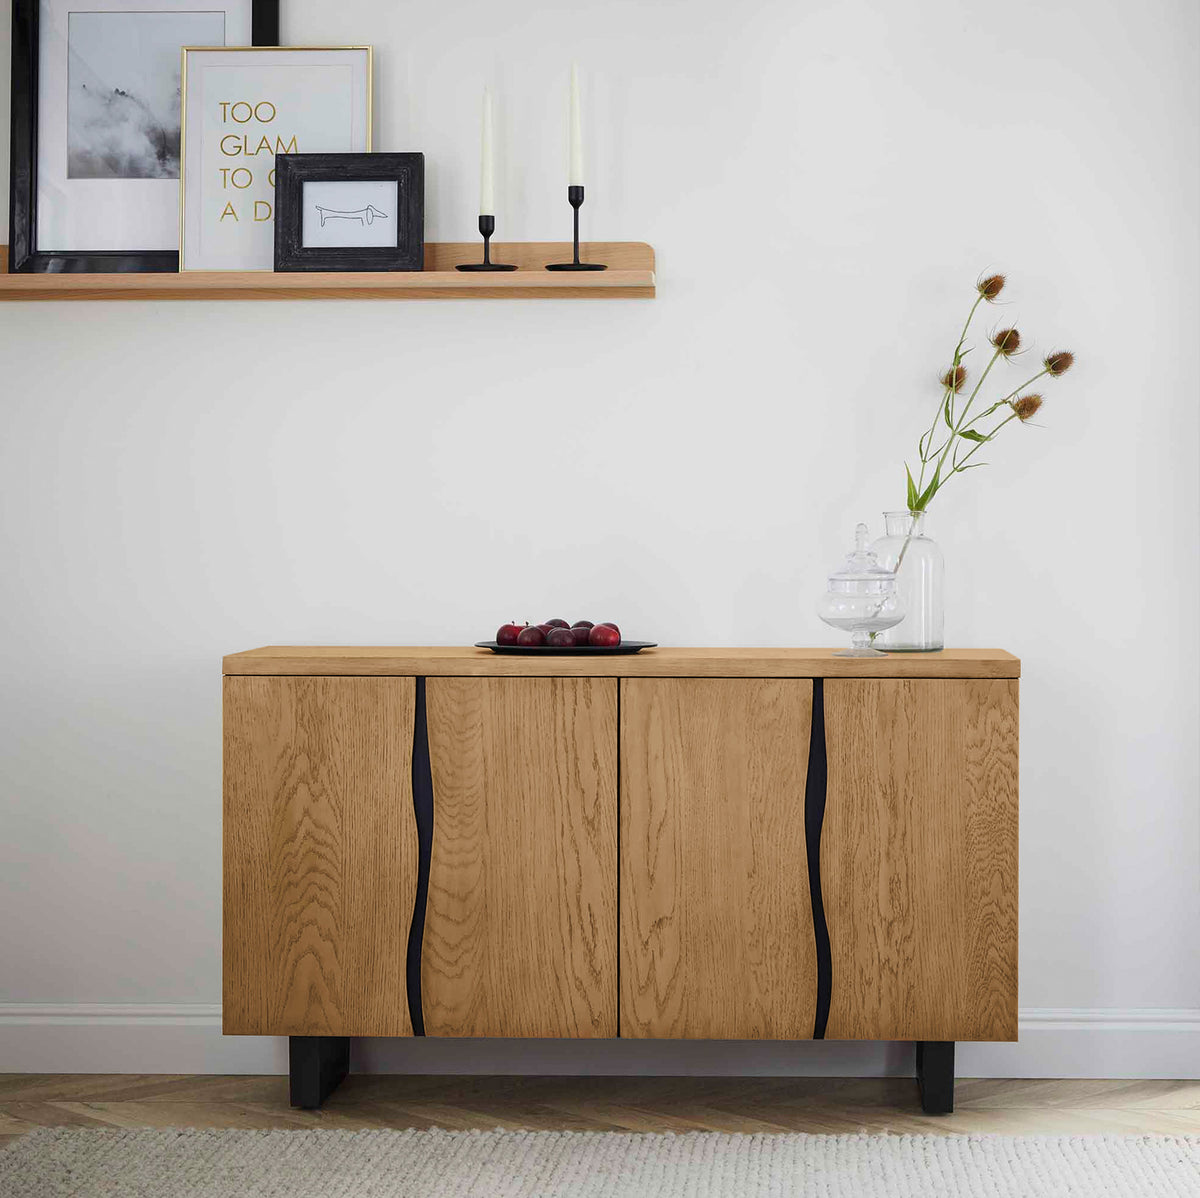 Isaac Oak Large Sideboard Cabinet from Roseland Furniture